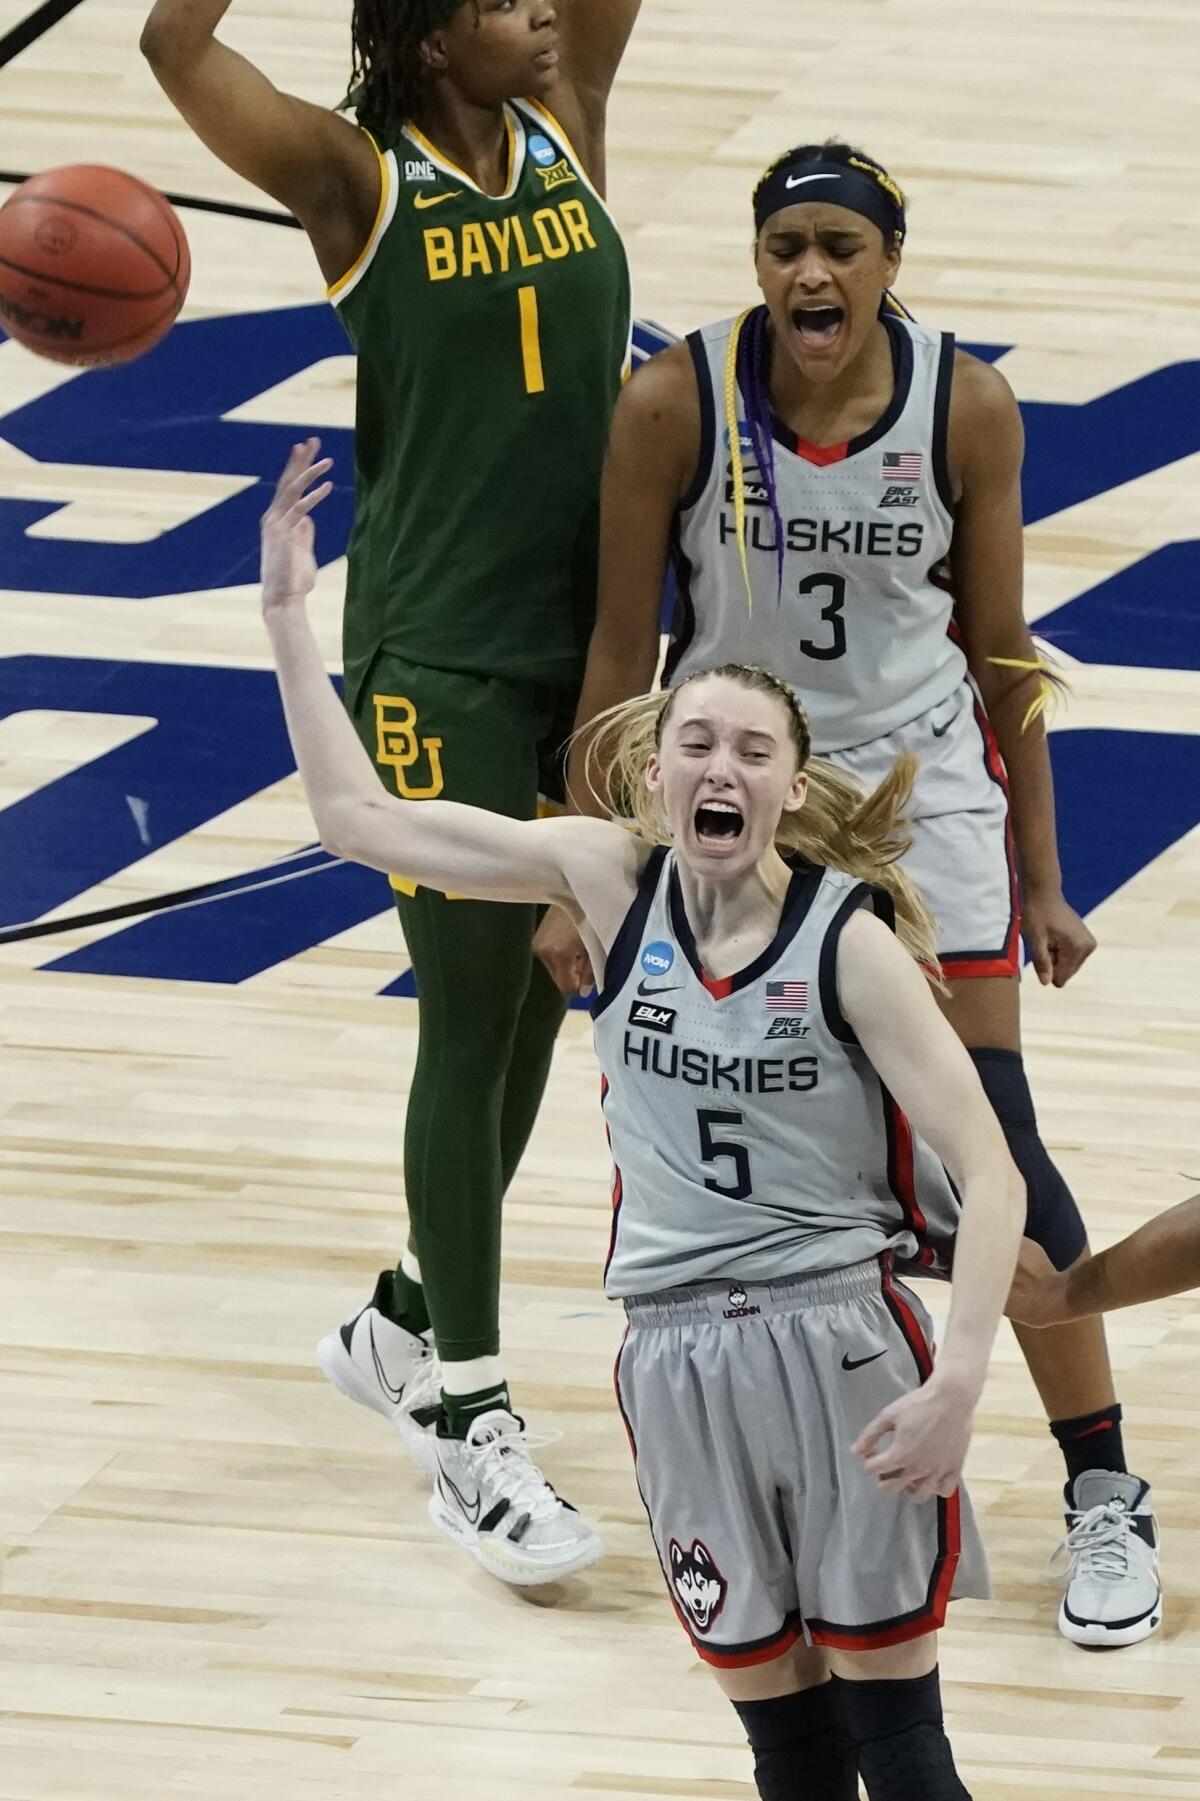 Final Four: Why UConn's Paige Bueckers is basketball's next big thing